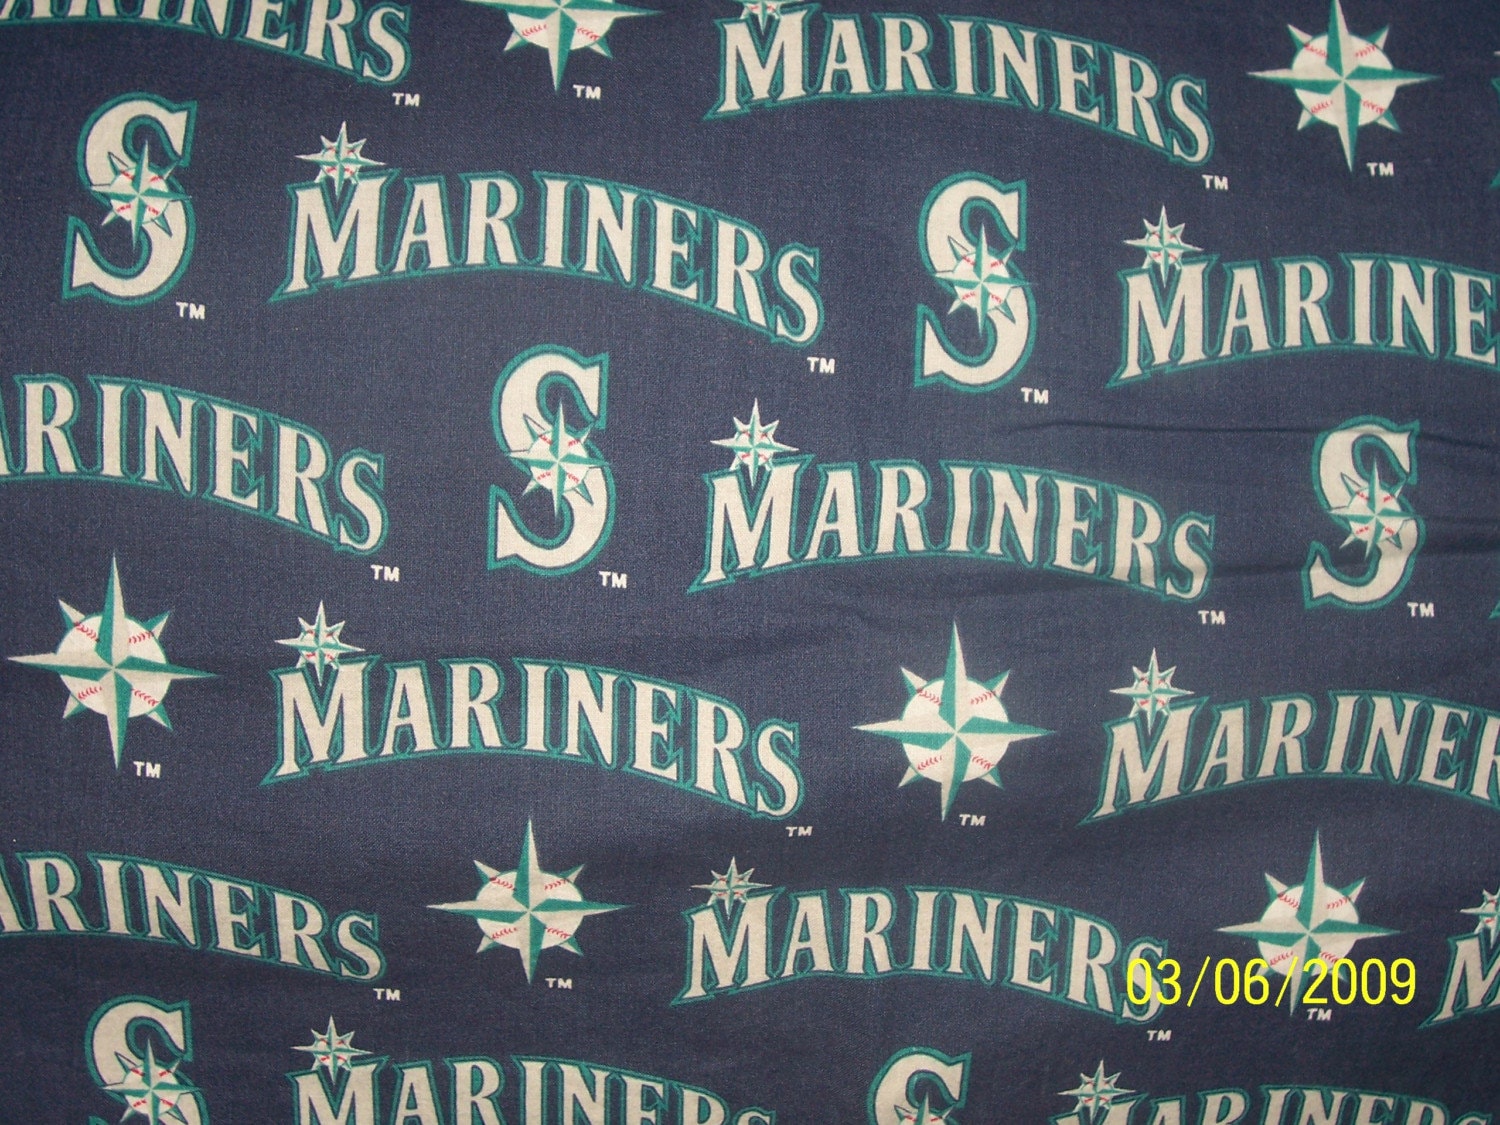 Seattle MARINERS cotton fabric by DeZignsbyJules on Etsy